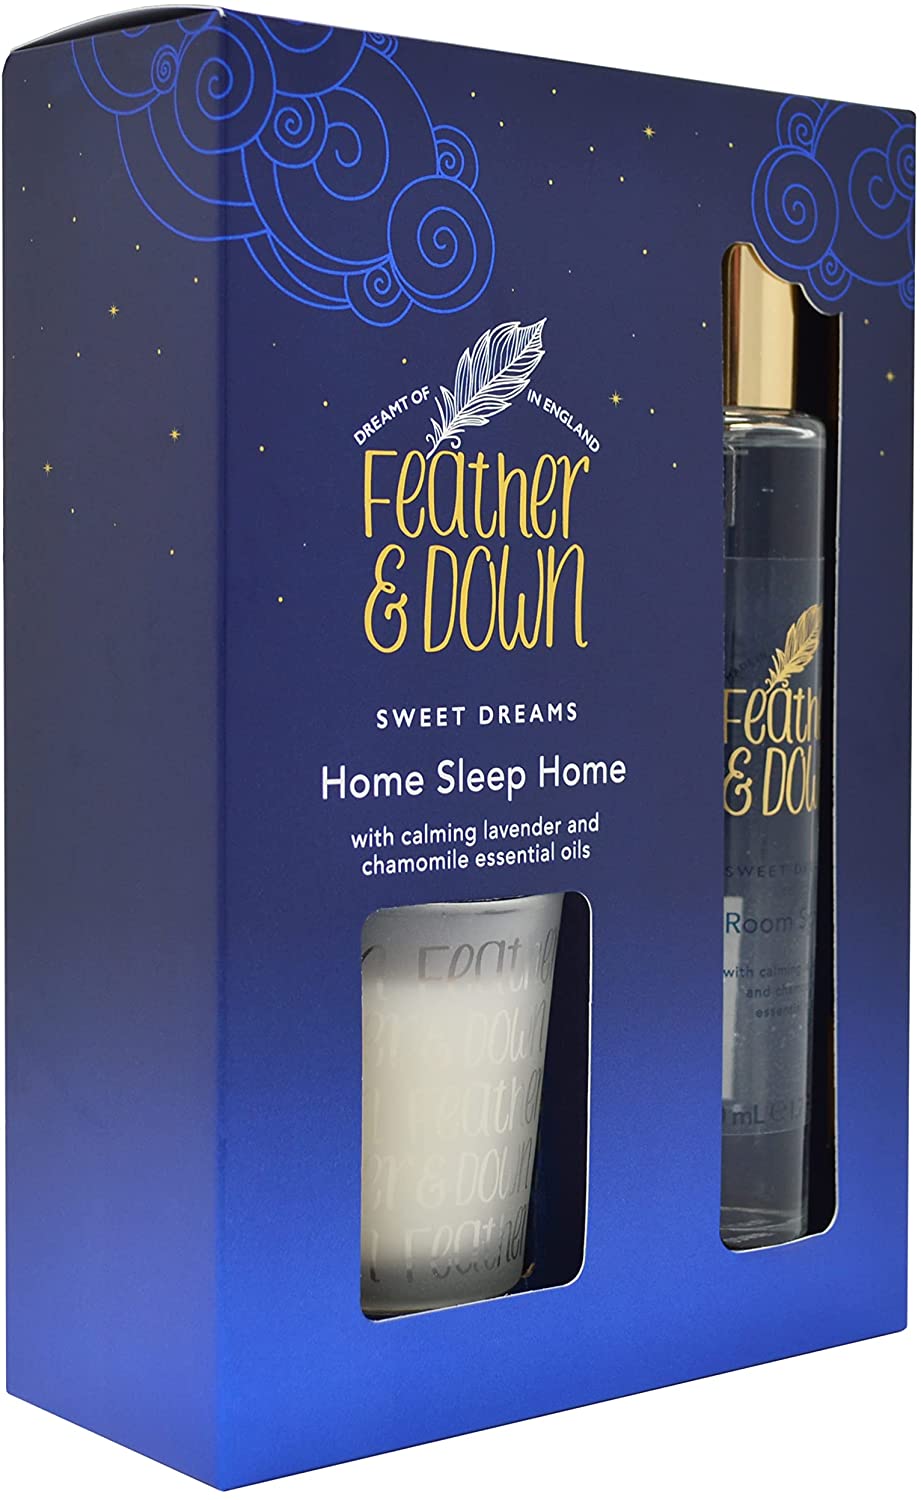 Home Sleep Home Gift Set - Feather and Down 